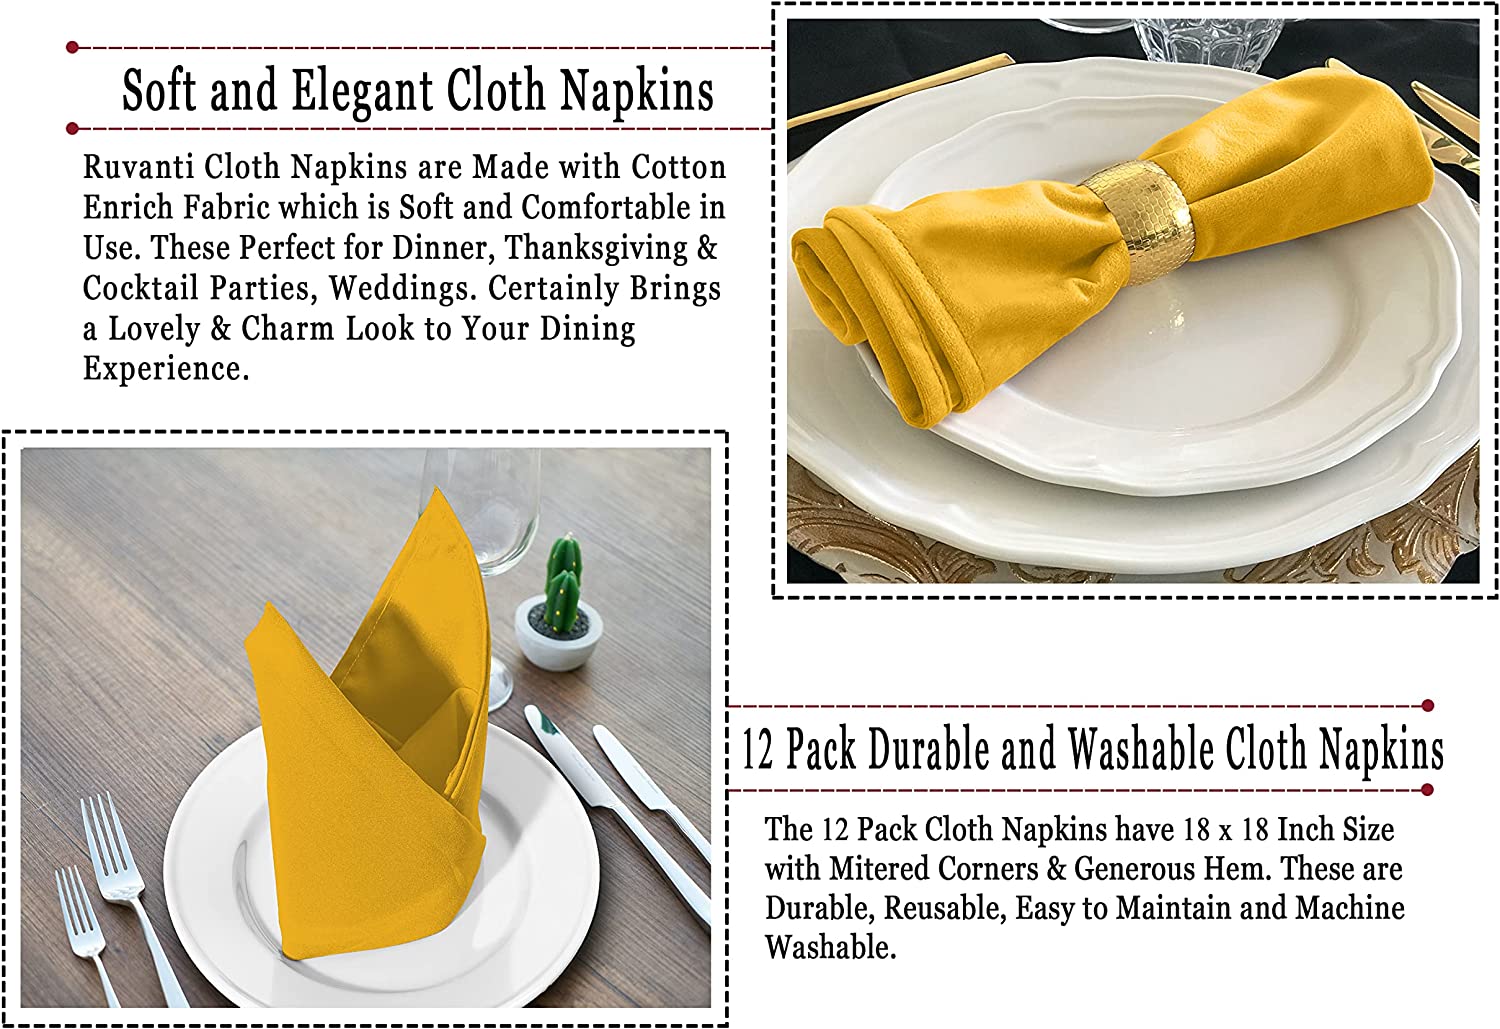 Ruvanti Cloth Napkins Set of 12, 18x18 inches Napkins Cloth Washable, Soft, Durable, Absorbent, Cotton Blend. Table Dinner Napkins Cloth for Hotel, Lunch, Restaurant, Wedding Event, Parties - Mustard - image 3 of 7